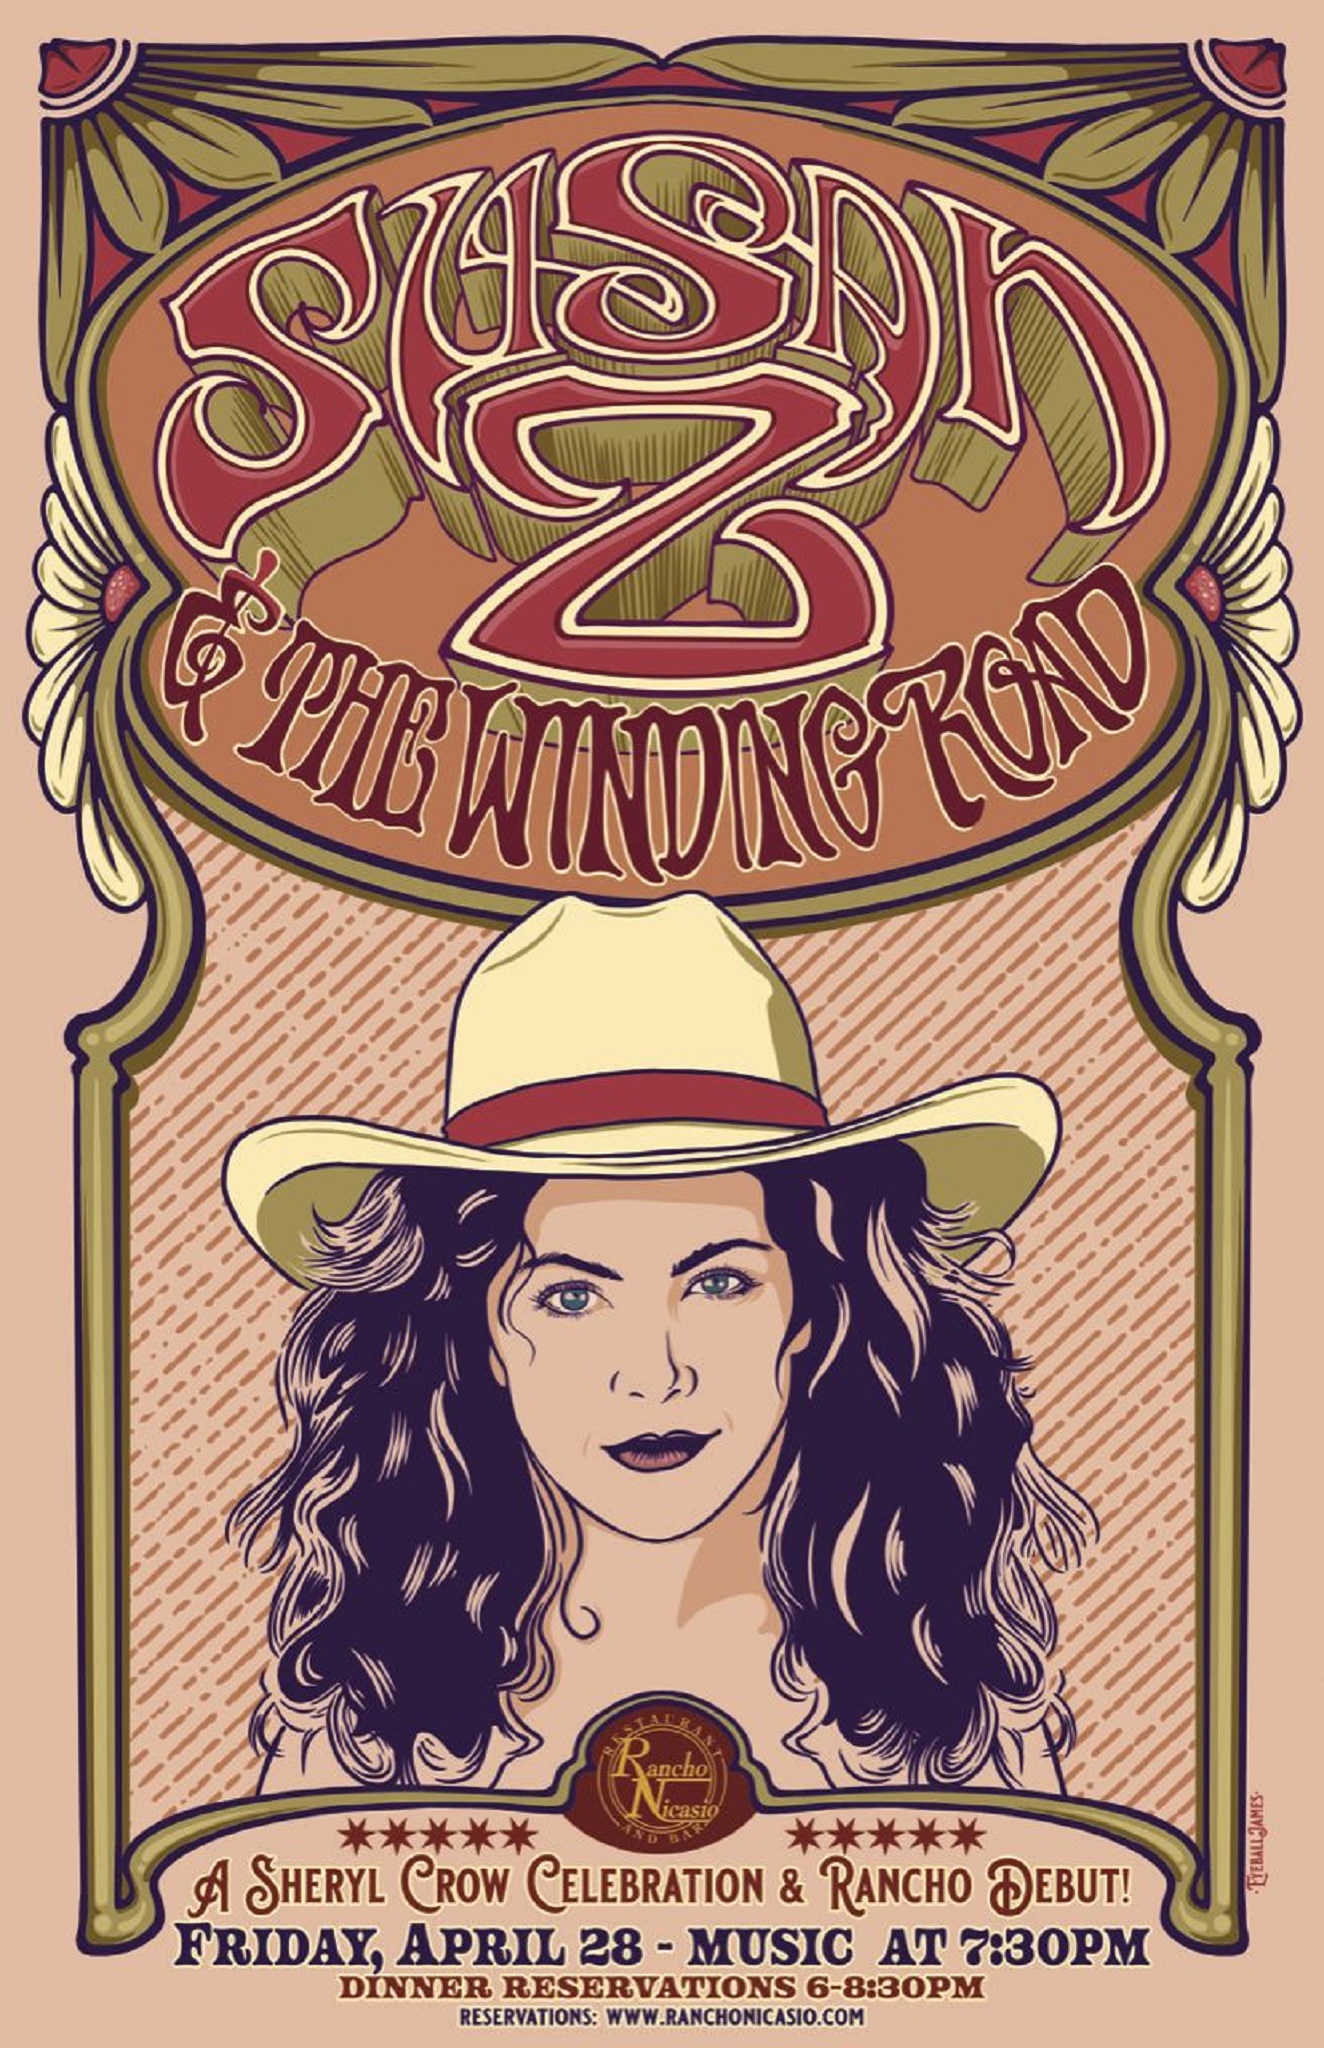 Susan Z and the Winding Road Pay Homage to the Music of Sheryl Crow